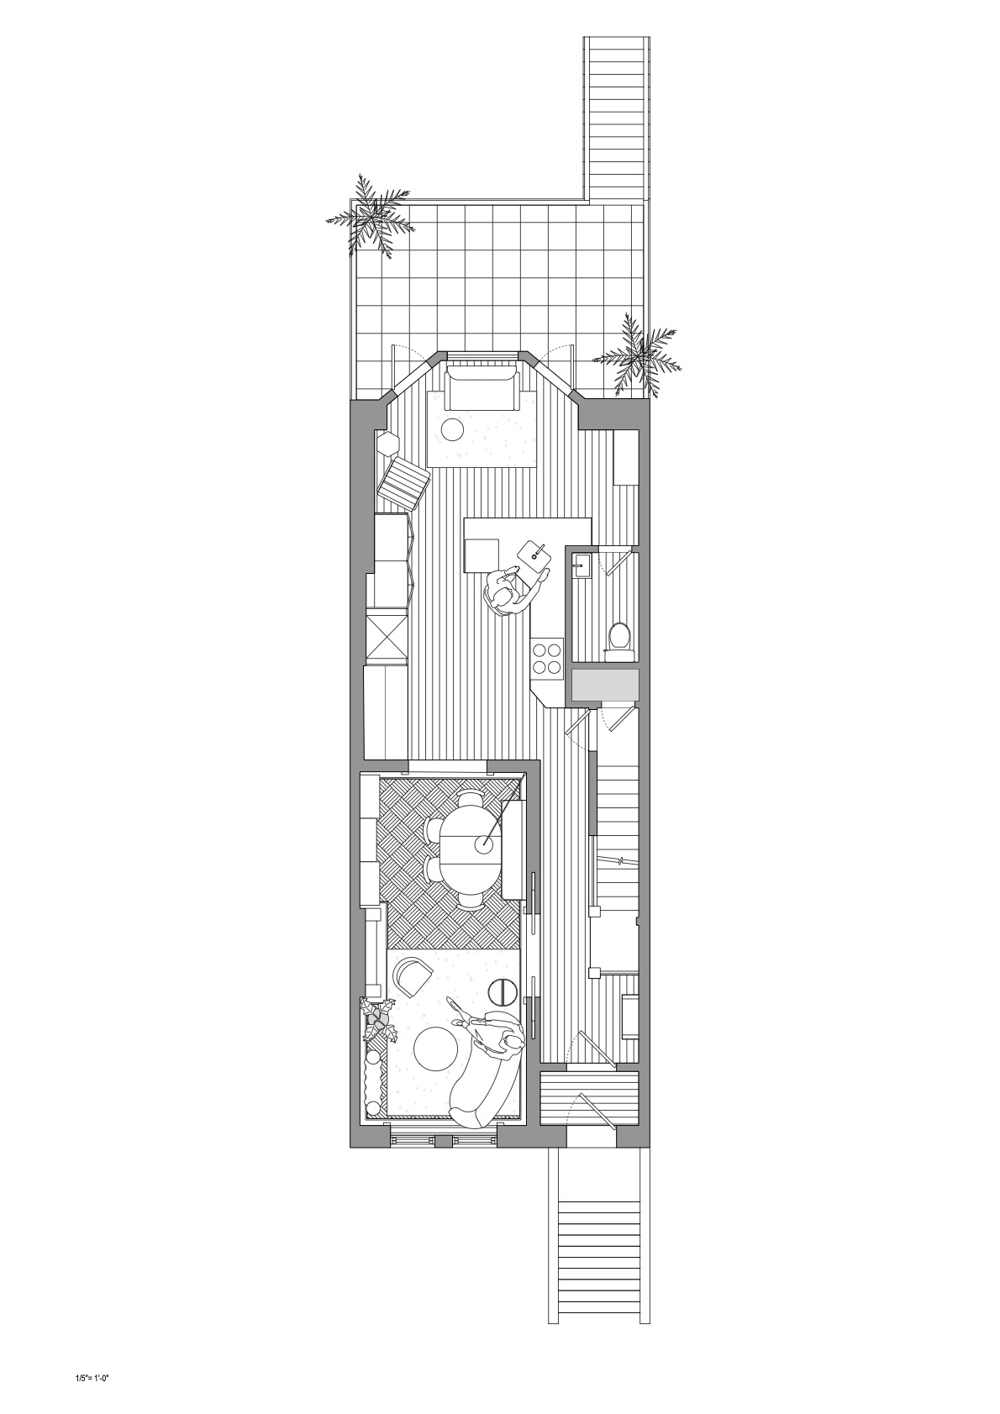 First Floor Plan, Courtesy Frederick Tang Architecture